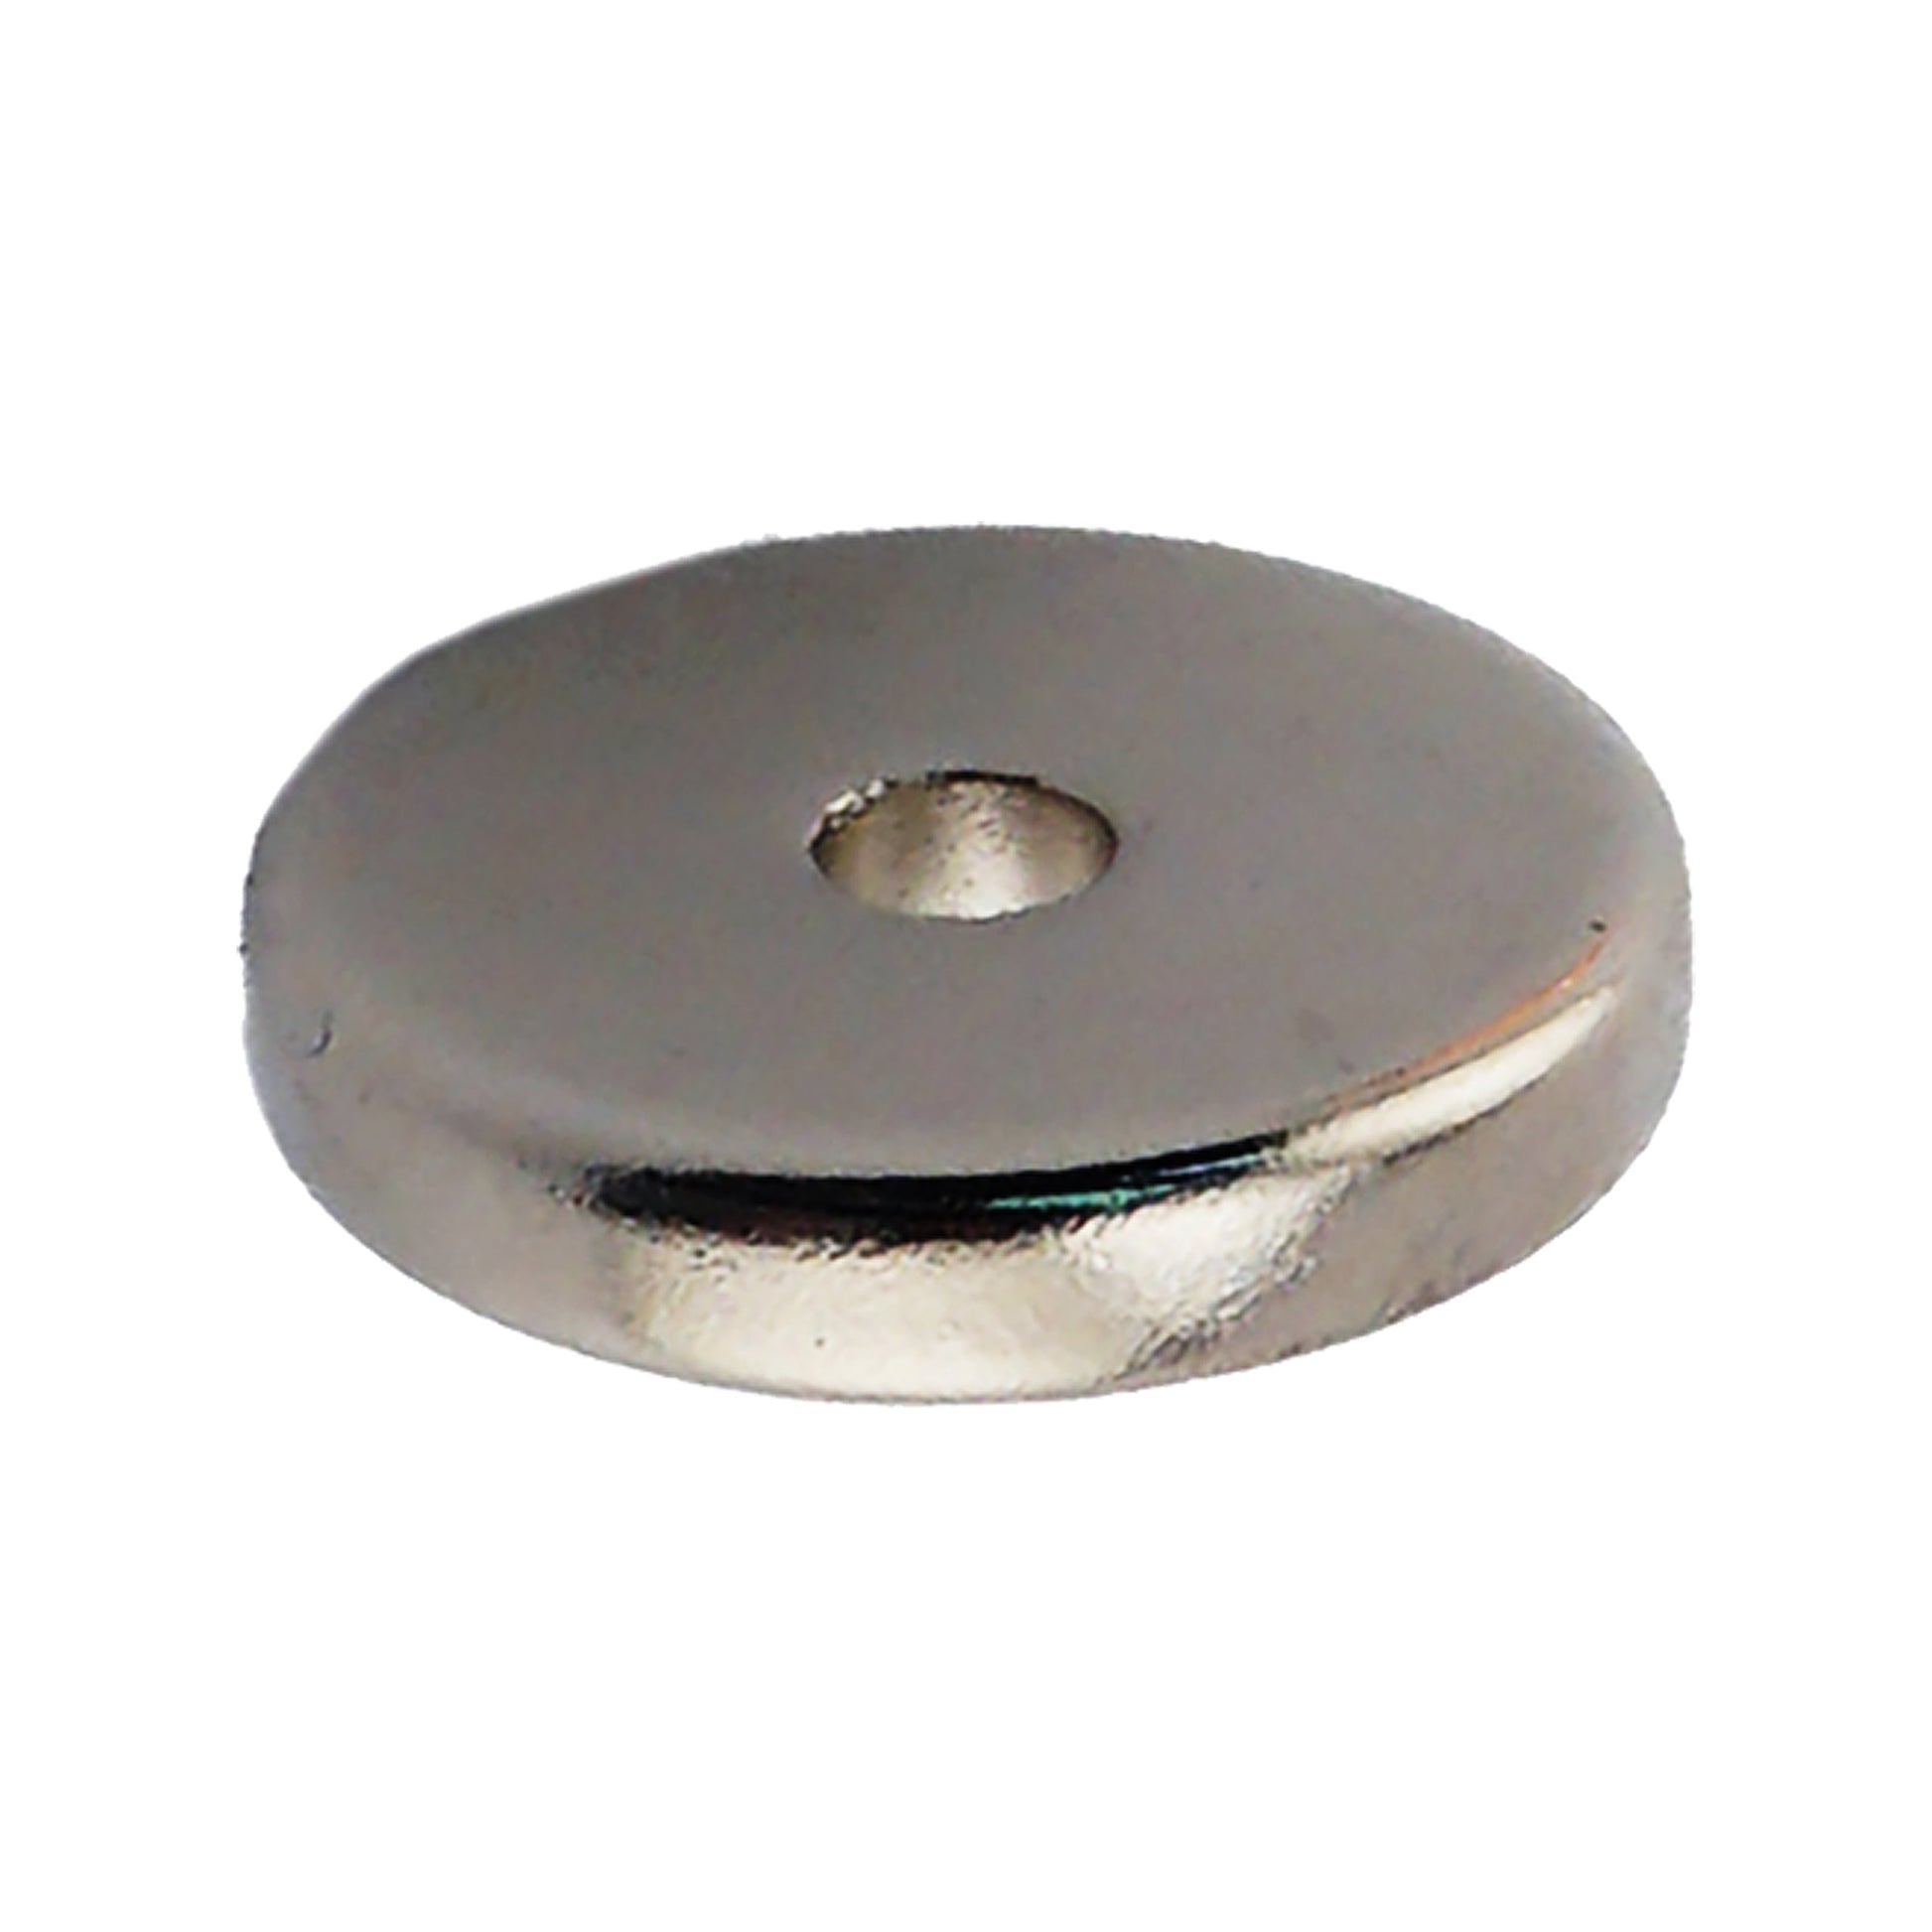 Load image into Gallery viewer, NR006205NS01 Neodymium Ring Magnet - Front View